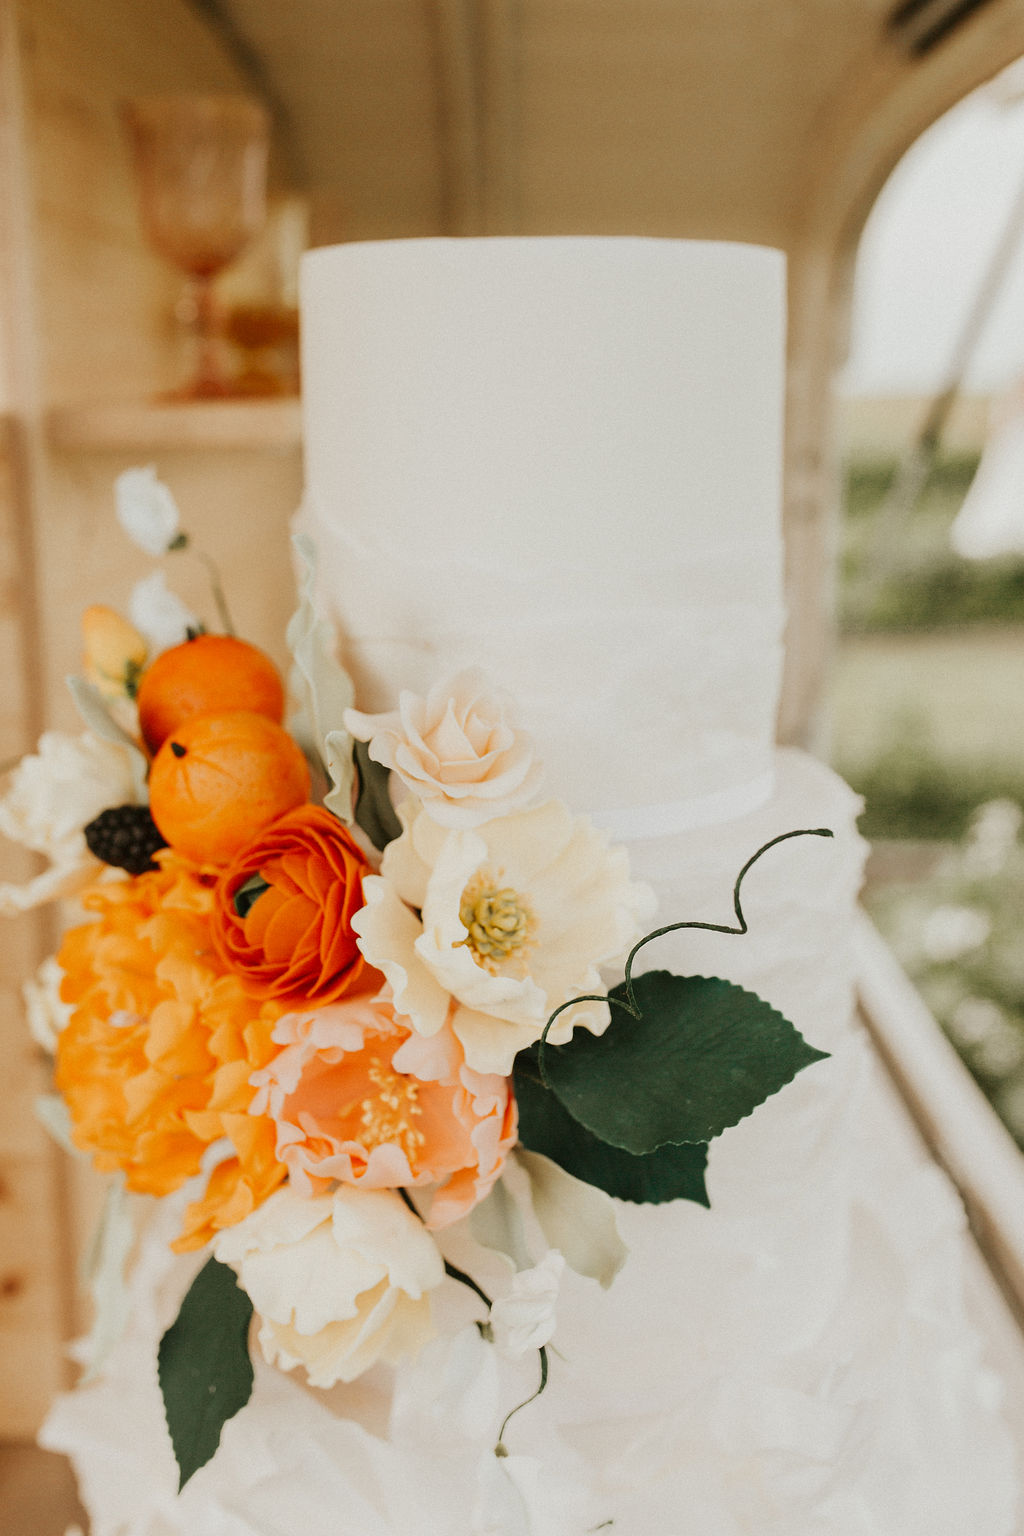 Stunning ruffled white wedding cake with bright tangerine inspired floral accents